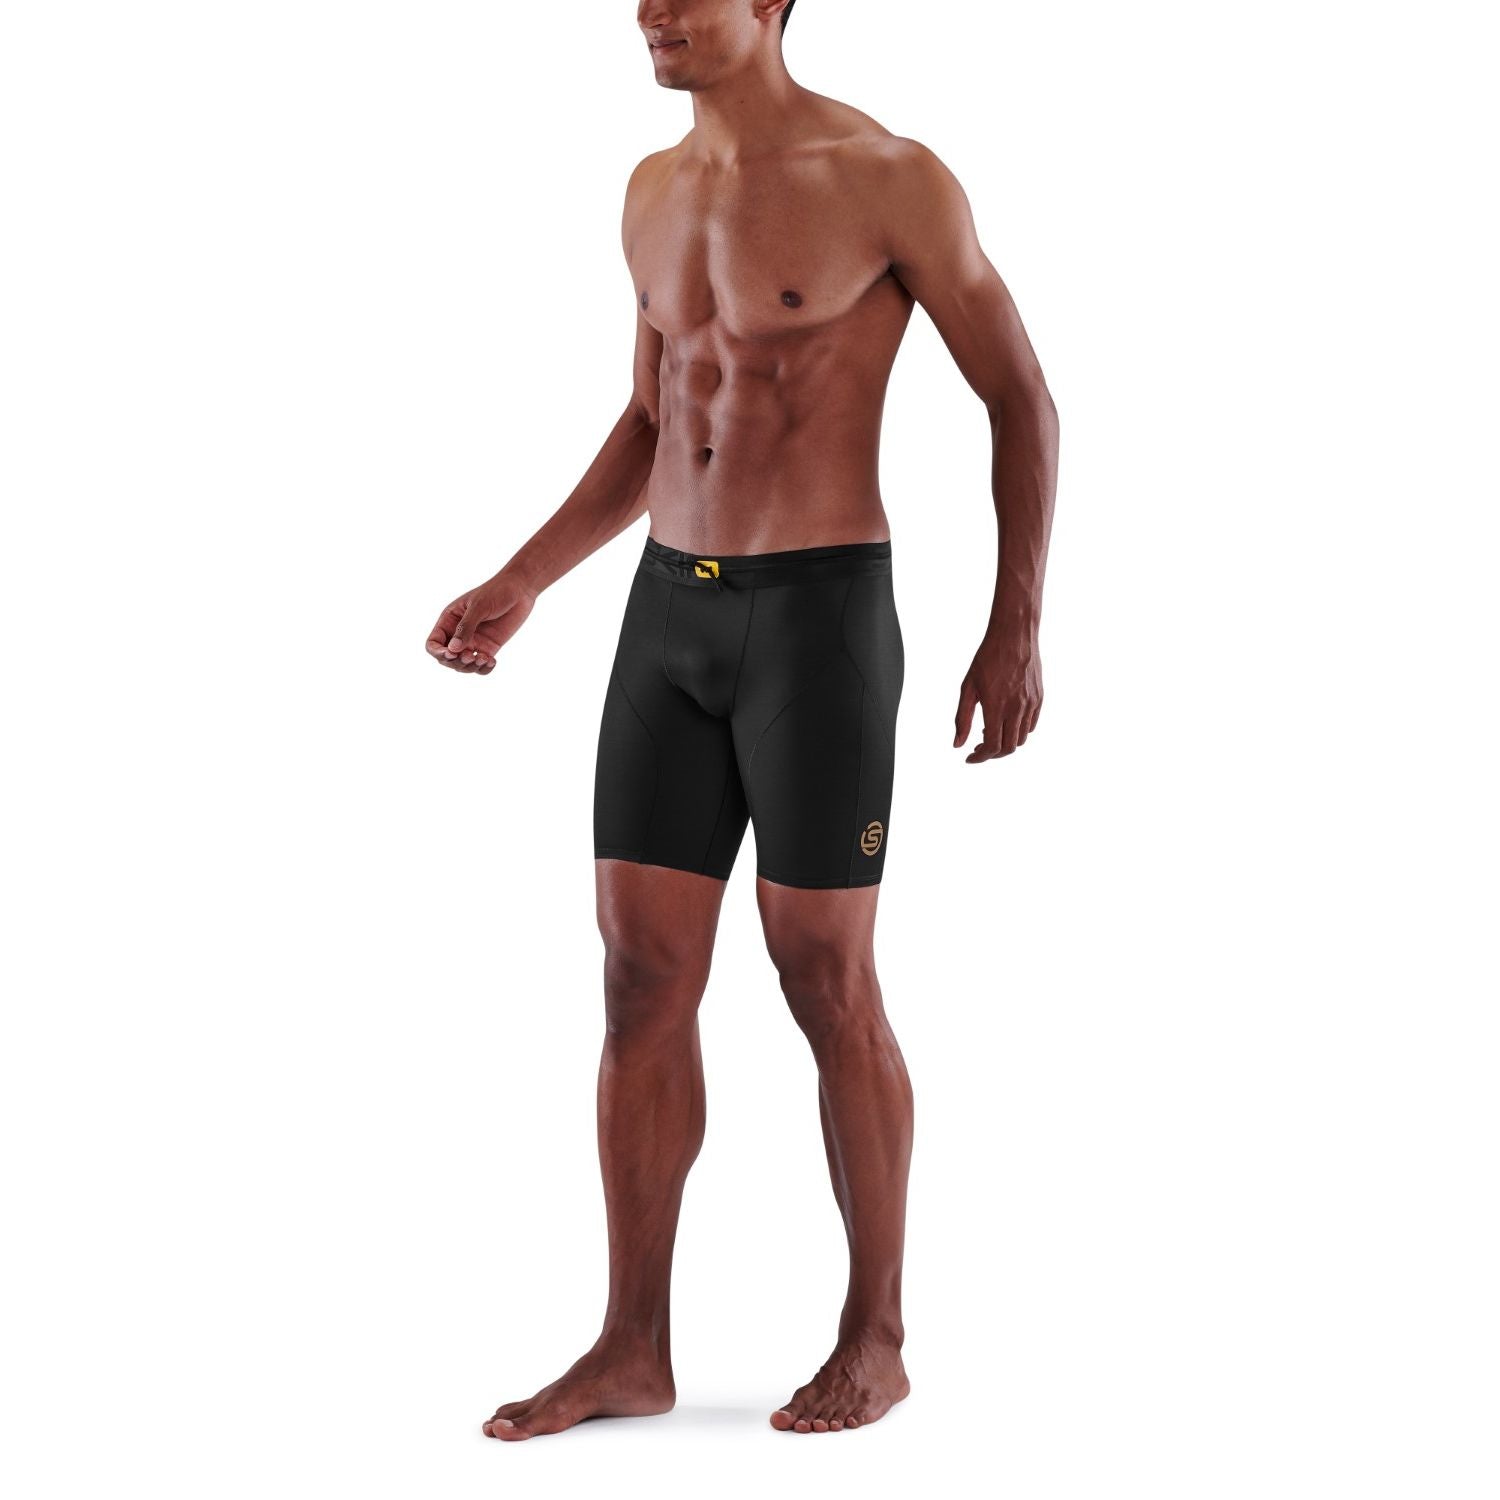 SKINS SERIES-5 MEN'S TRAVEL AND RECOVERY LONG TIGHTS BLACK - SKINS